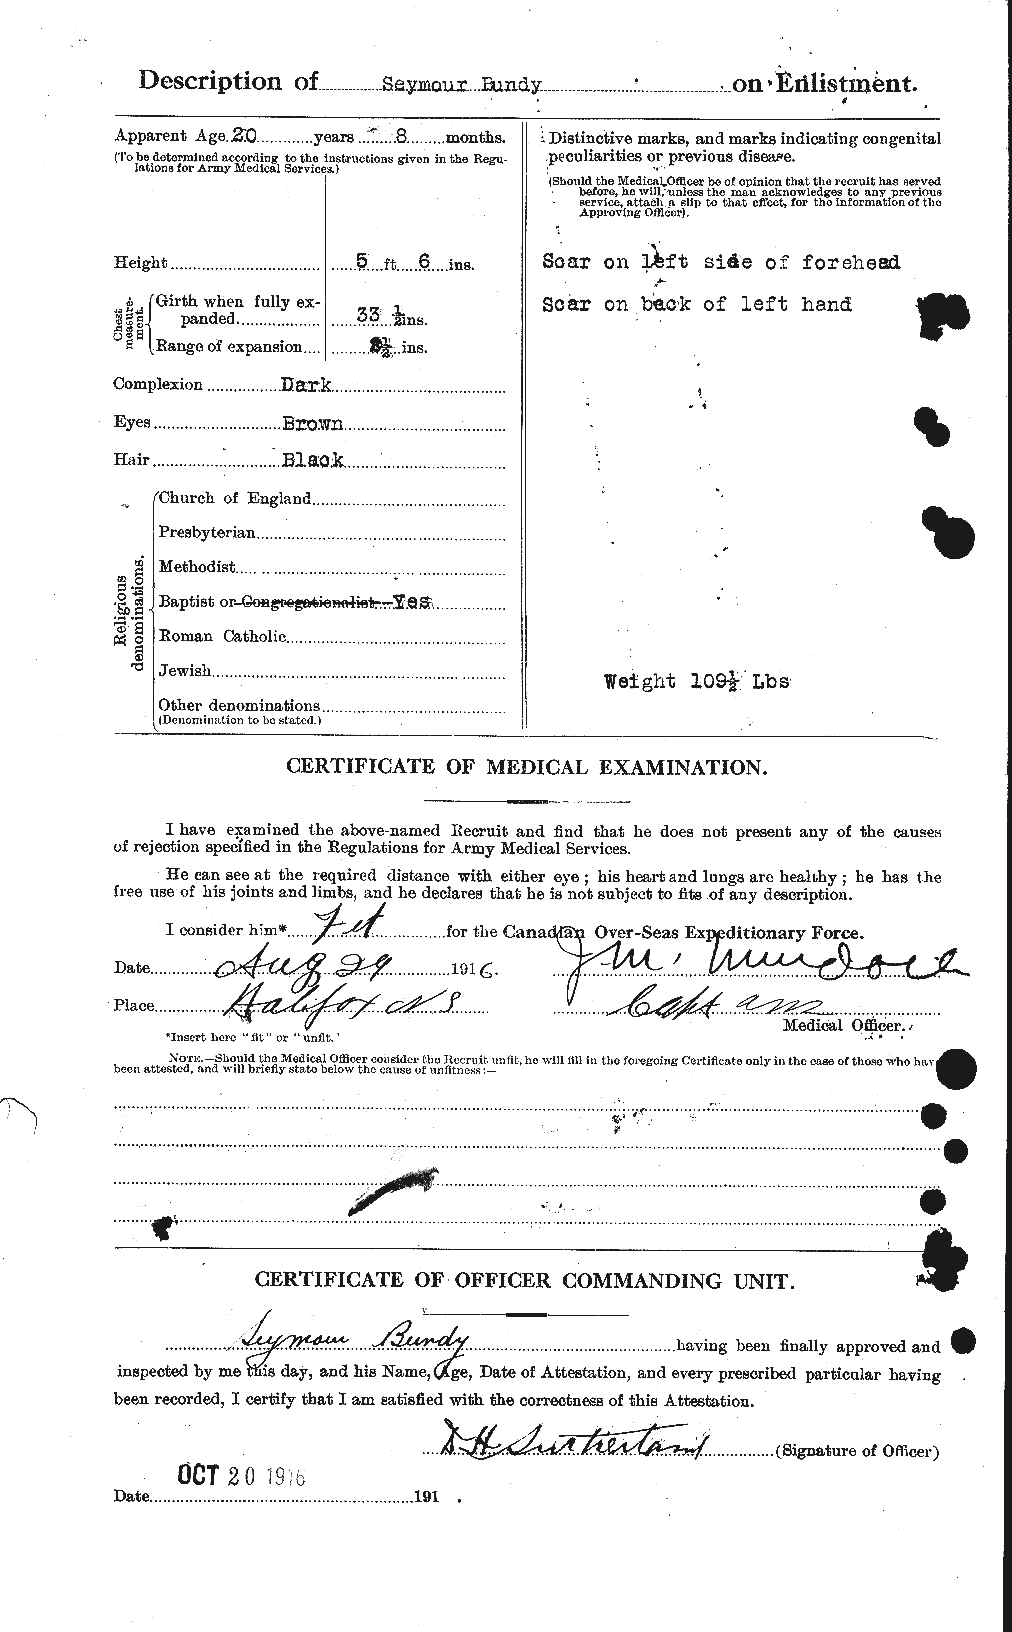 Personnel Records of the First World War - CEF 270377b